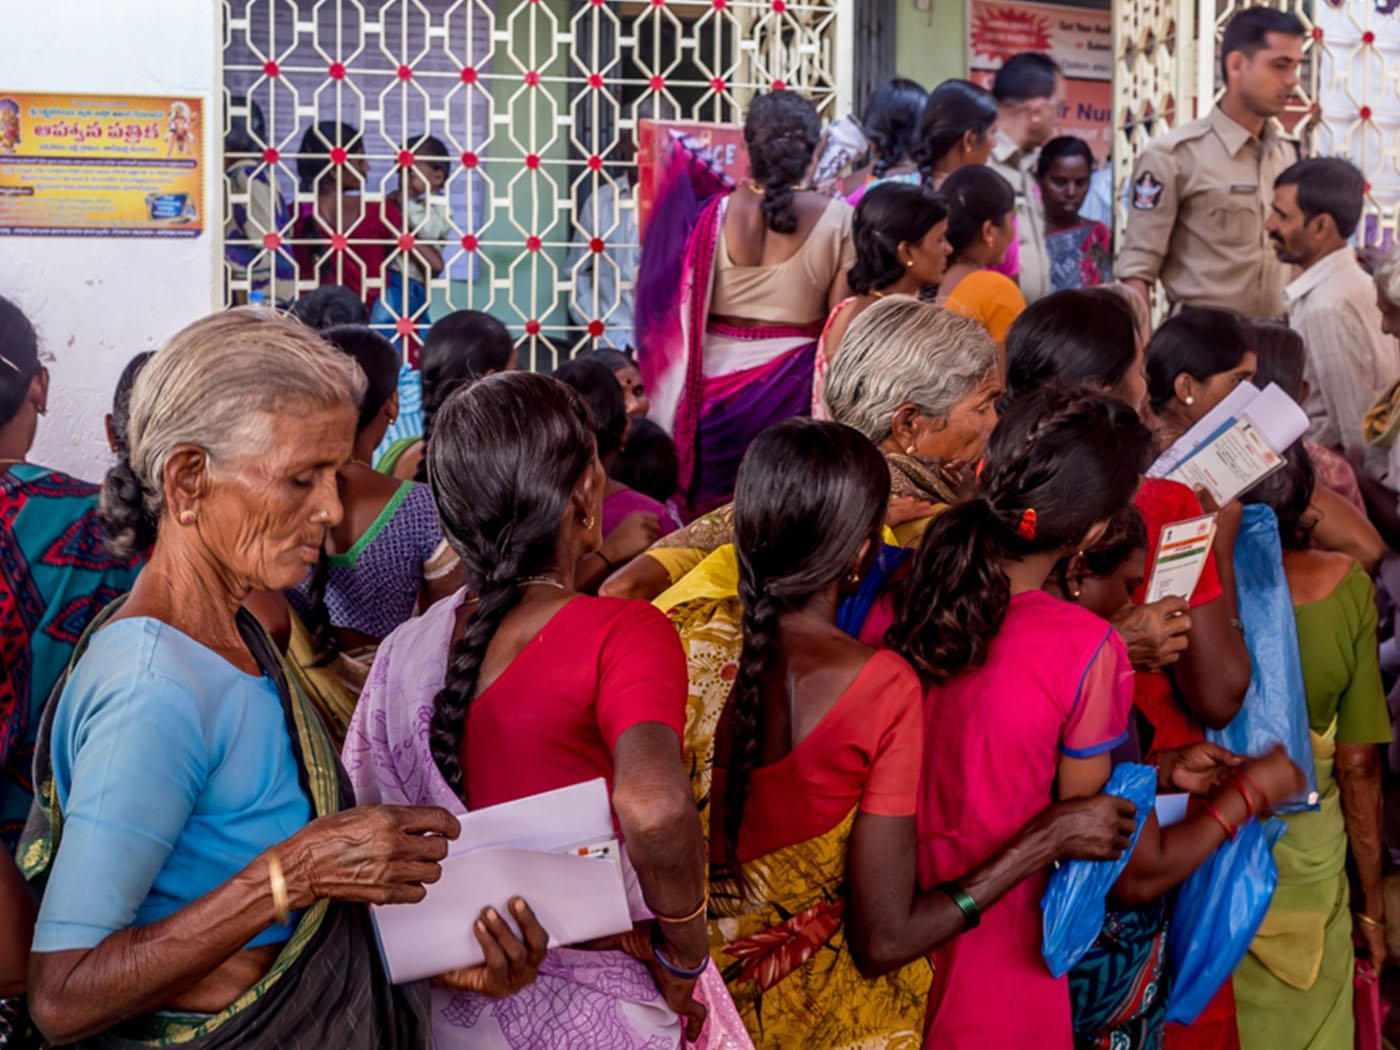 The long and winding lines at the State Bank of India in Tadimarri – many agricultural labourers here can’t afford to wait in the long queues instead of looking for work; many don’t even have bank accounts